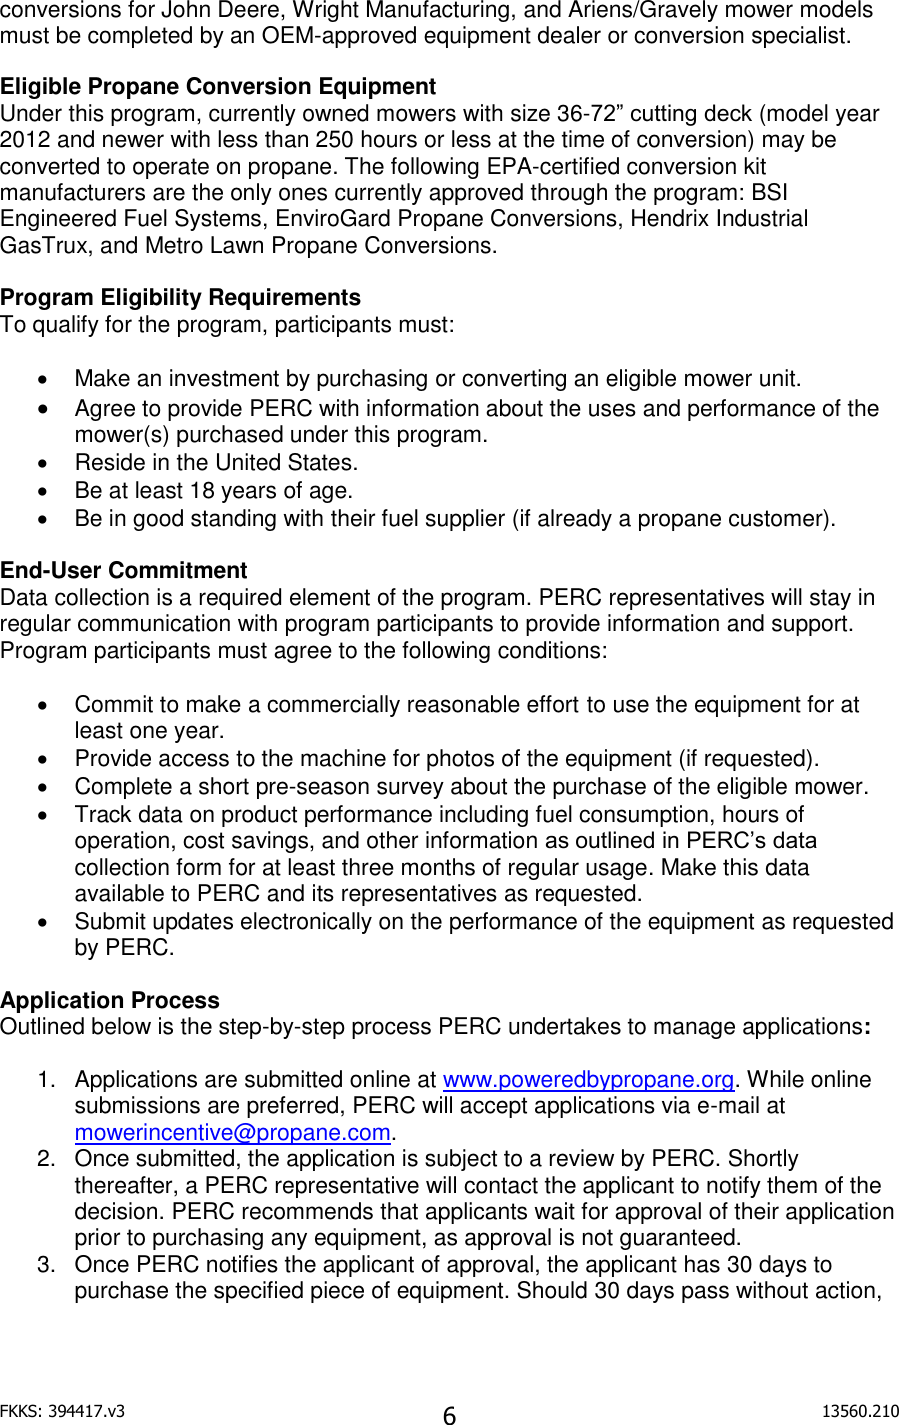 Page 6 of 7 - !! 2015 Propane Mower Incentive Guidelines - Feb